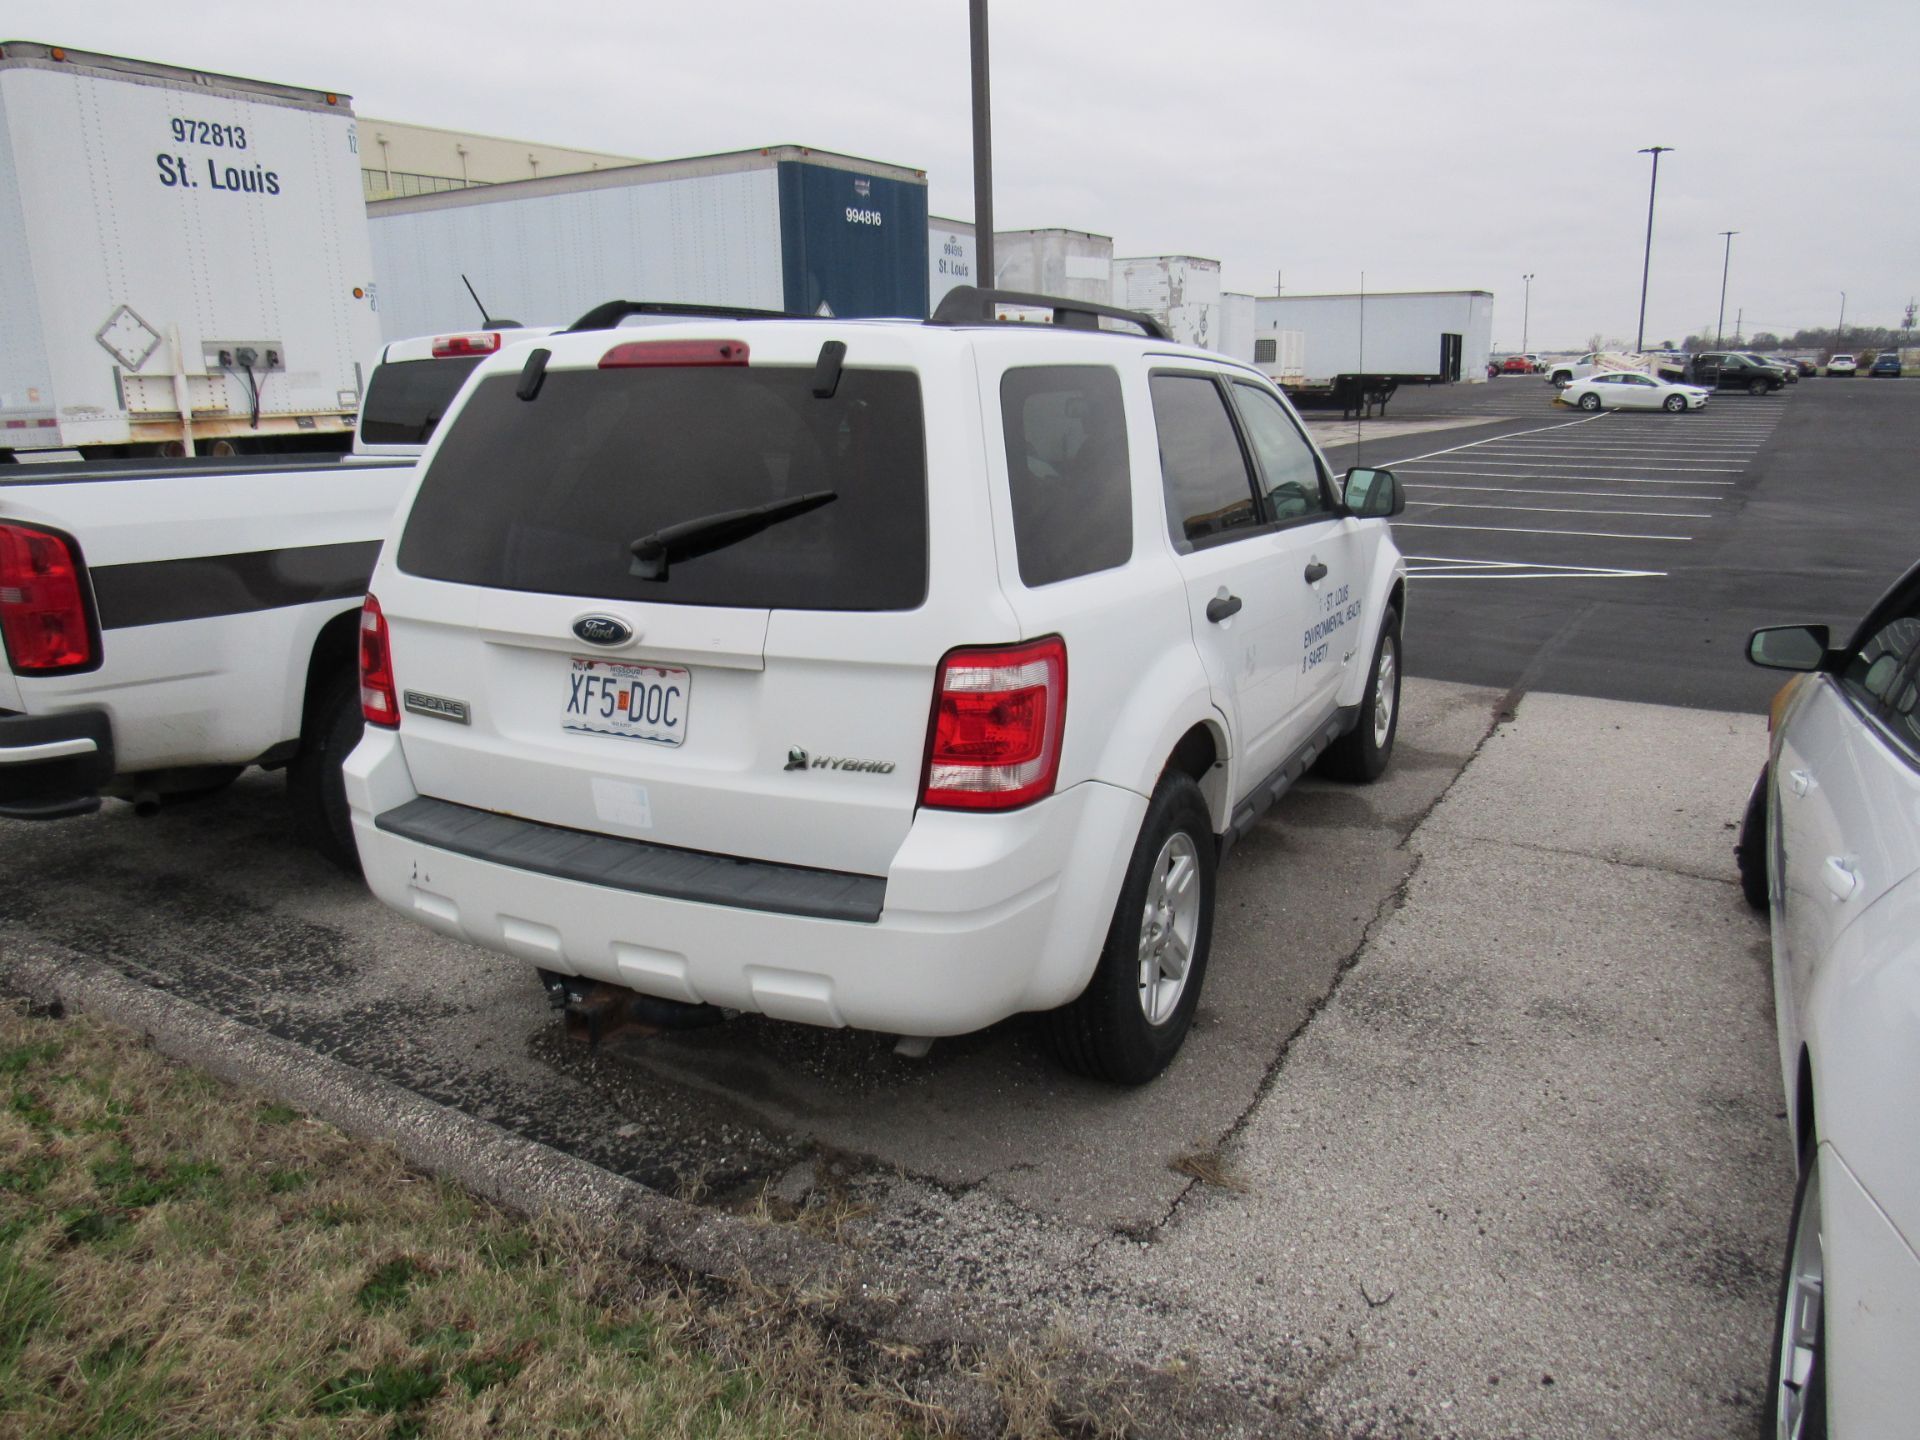 2009 Ford Escape Hybrid - Image 2 of 8